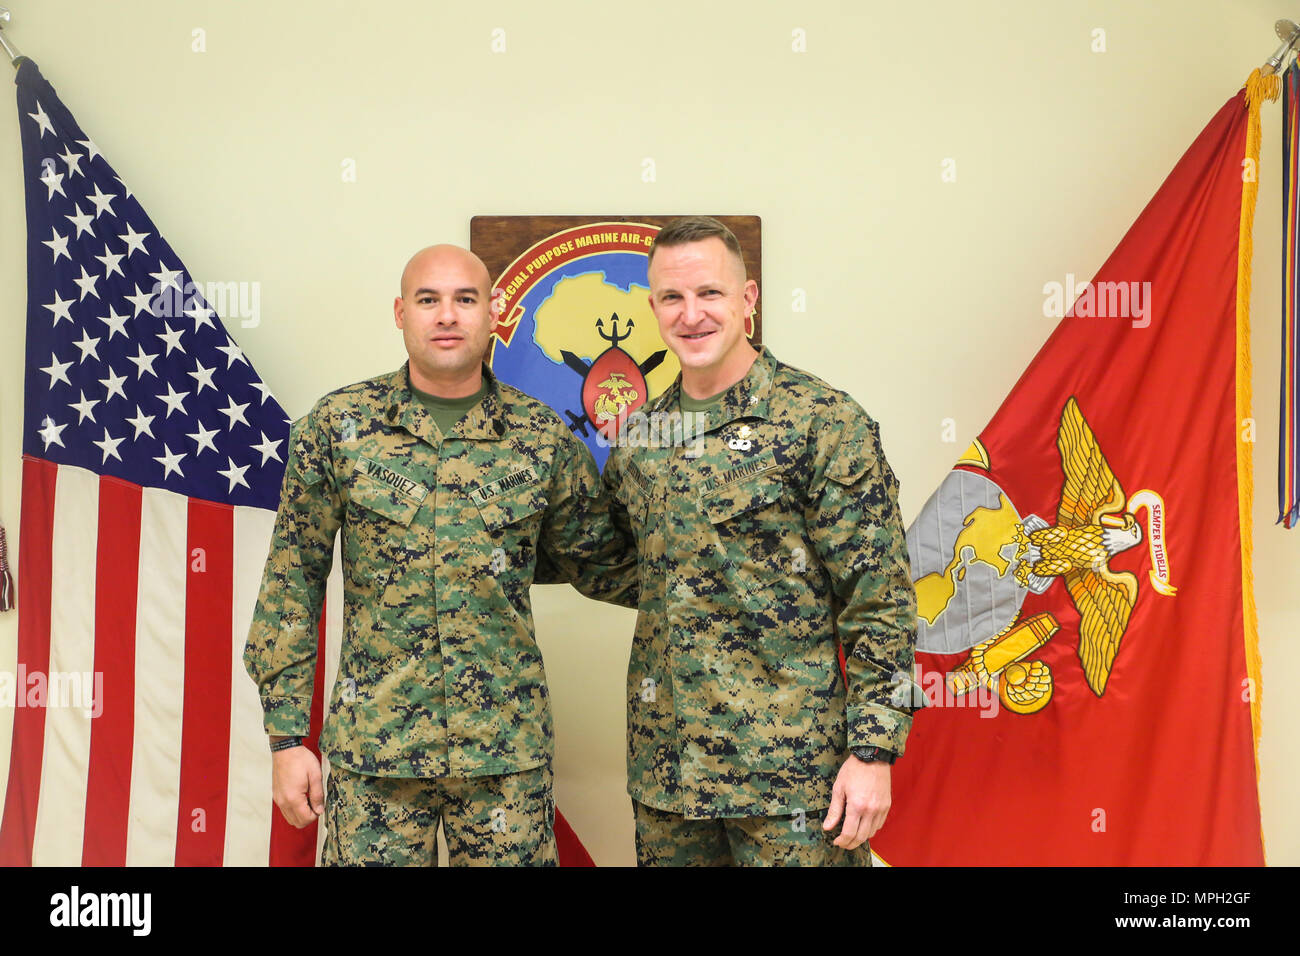 Gunnery Sgt. Juan Vasquez Jr., a U.S. Marine assigned to Special Purpose Marine Air-Ground Task Force – Crisis Response – Africa, poses for a photo with Col. Daniel Greenwood, the commanding officer of SPMAGTF-CR-AF, at Naval Air Station Sigonella, Italy, Feb. 25, 2017. Greenwood formerly served as the commanding officer for Marine Corps Recruiting Station Fort Lauderdale, Florida, while Vasquez was a poolee for the station in 2003. (U.S. Marine Corps photo by Cpl. Samuel Guerra/Released) Stock Photo